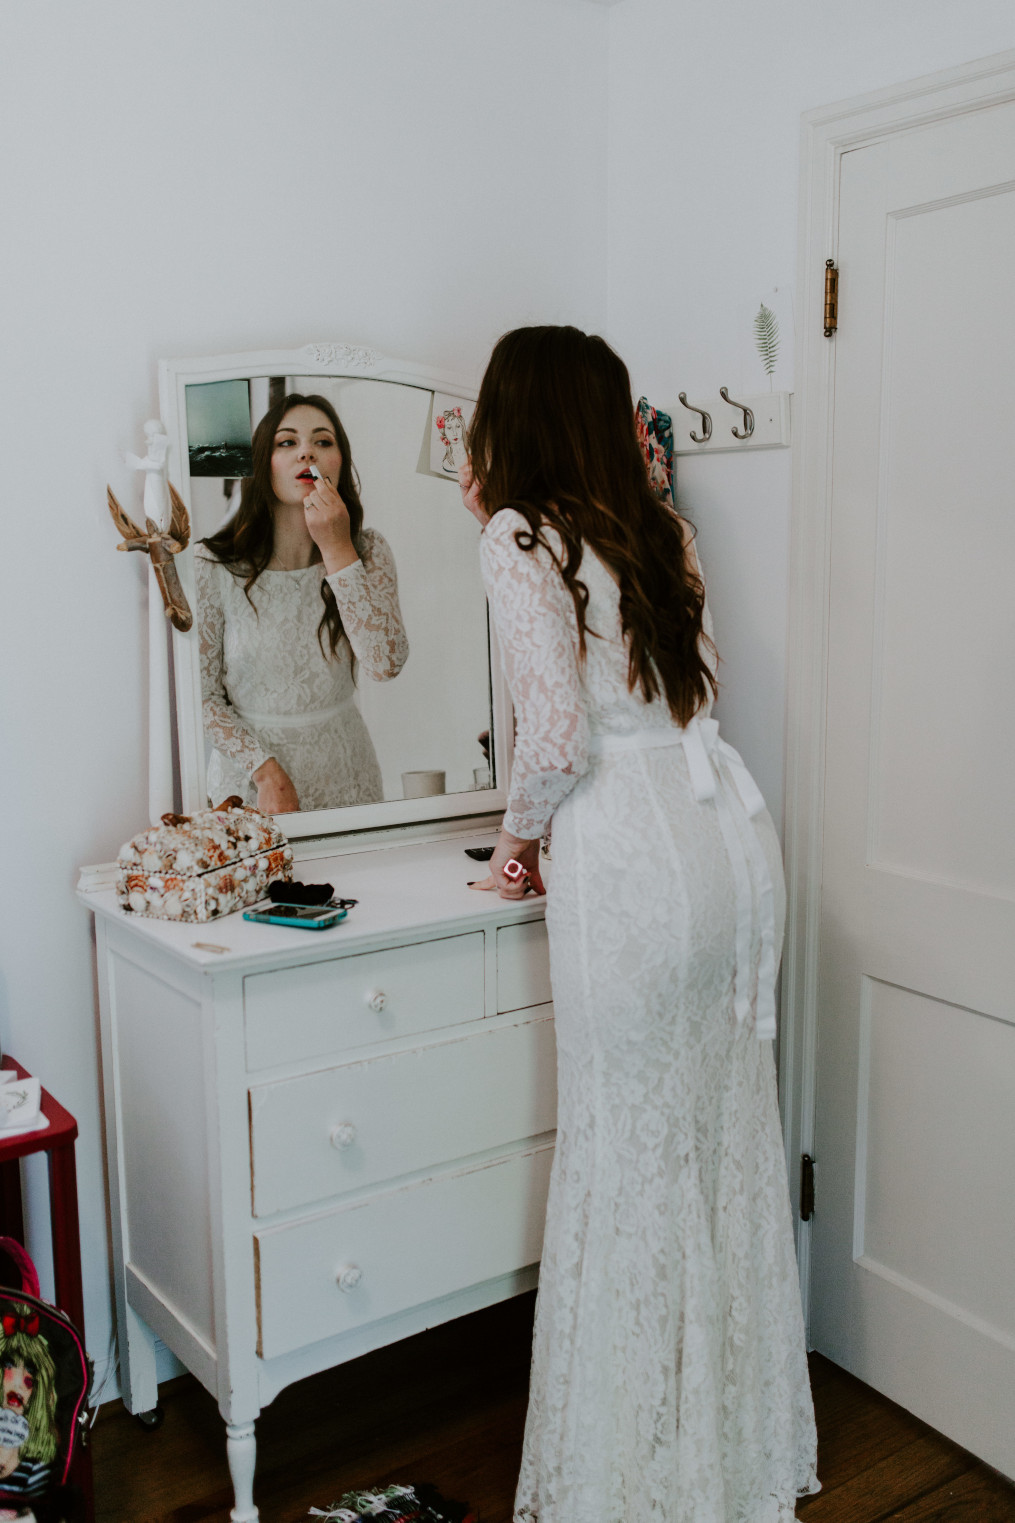 Nicole puts on lipstick at Cannon Beach. Elopement wedding photography at Cannon Beach by Sienna Plus Josh.